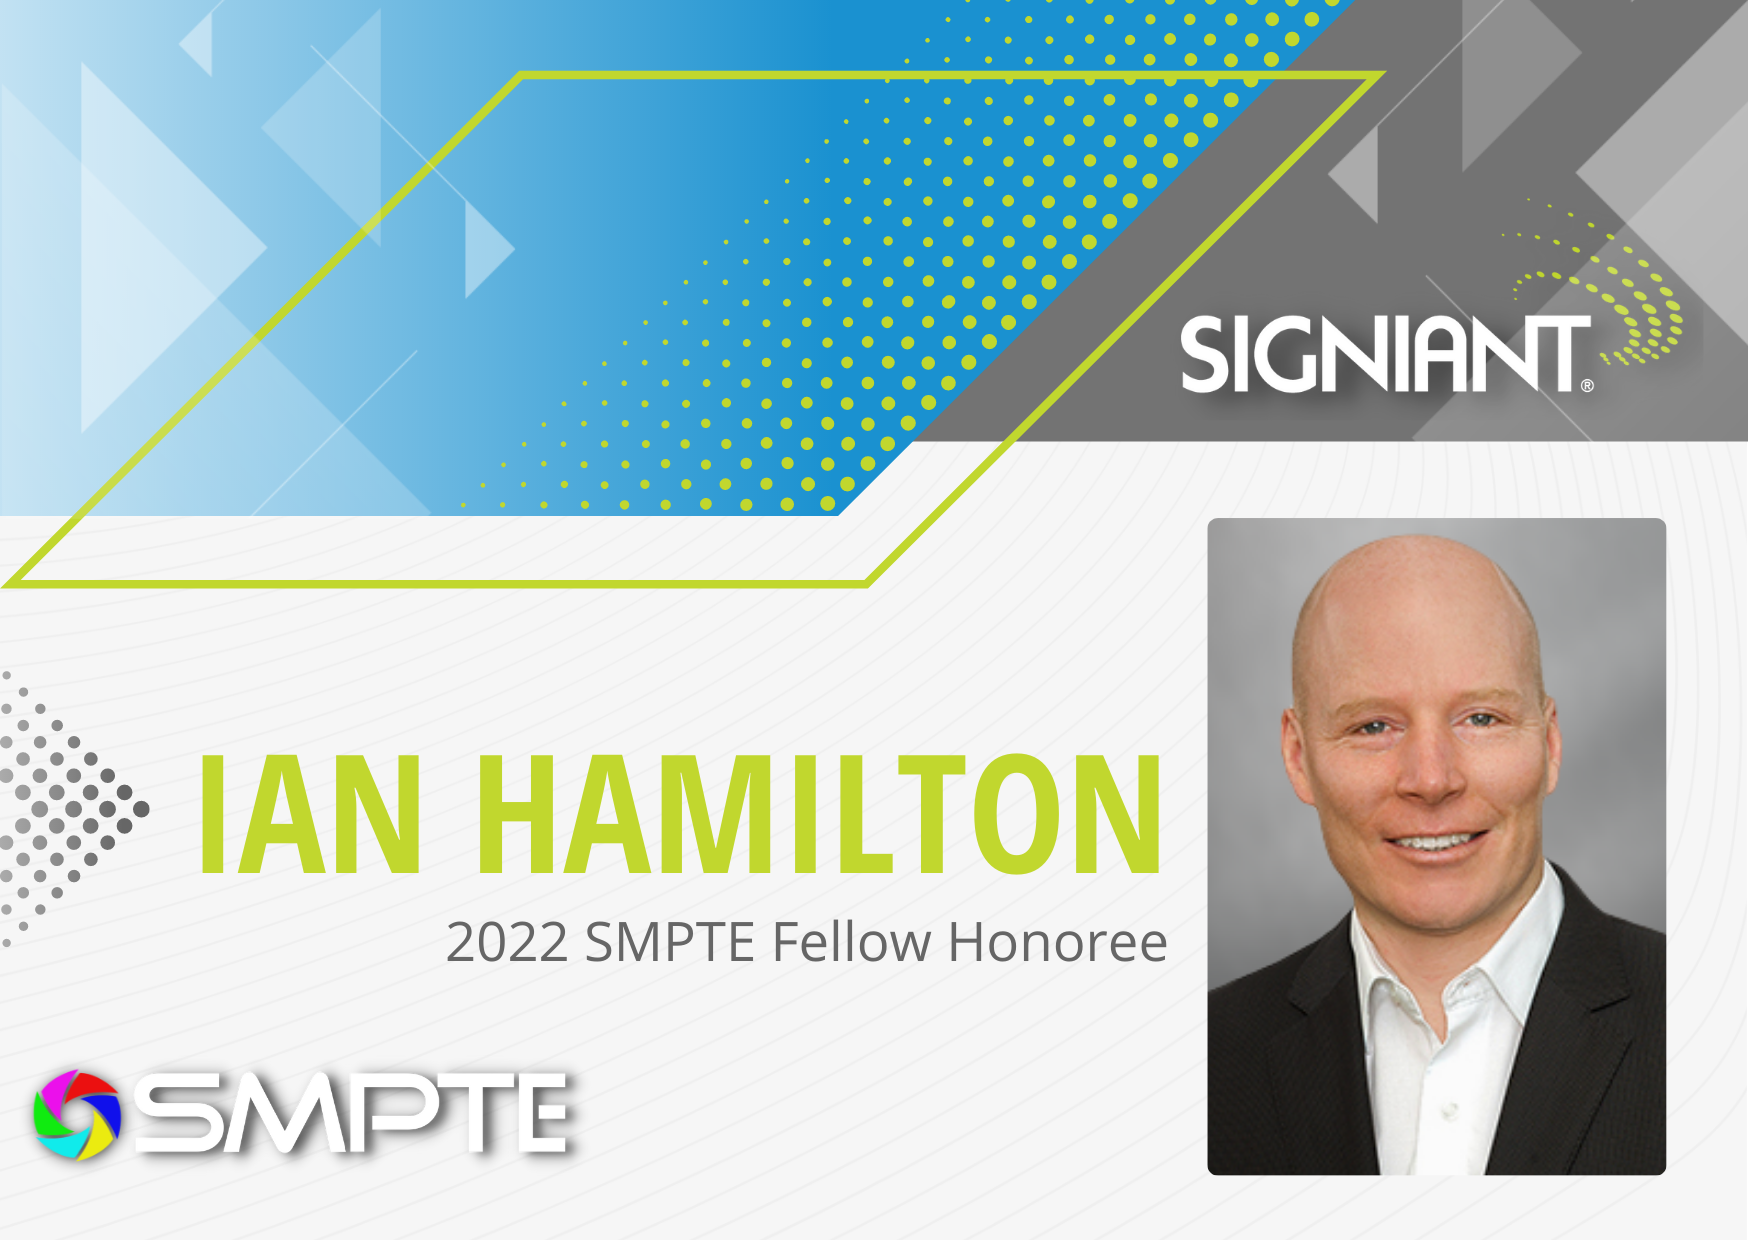 Signiant's Ian Hamilton recognized as 2022 SMPTE Fellow Honoree